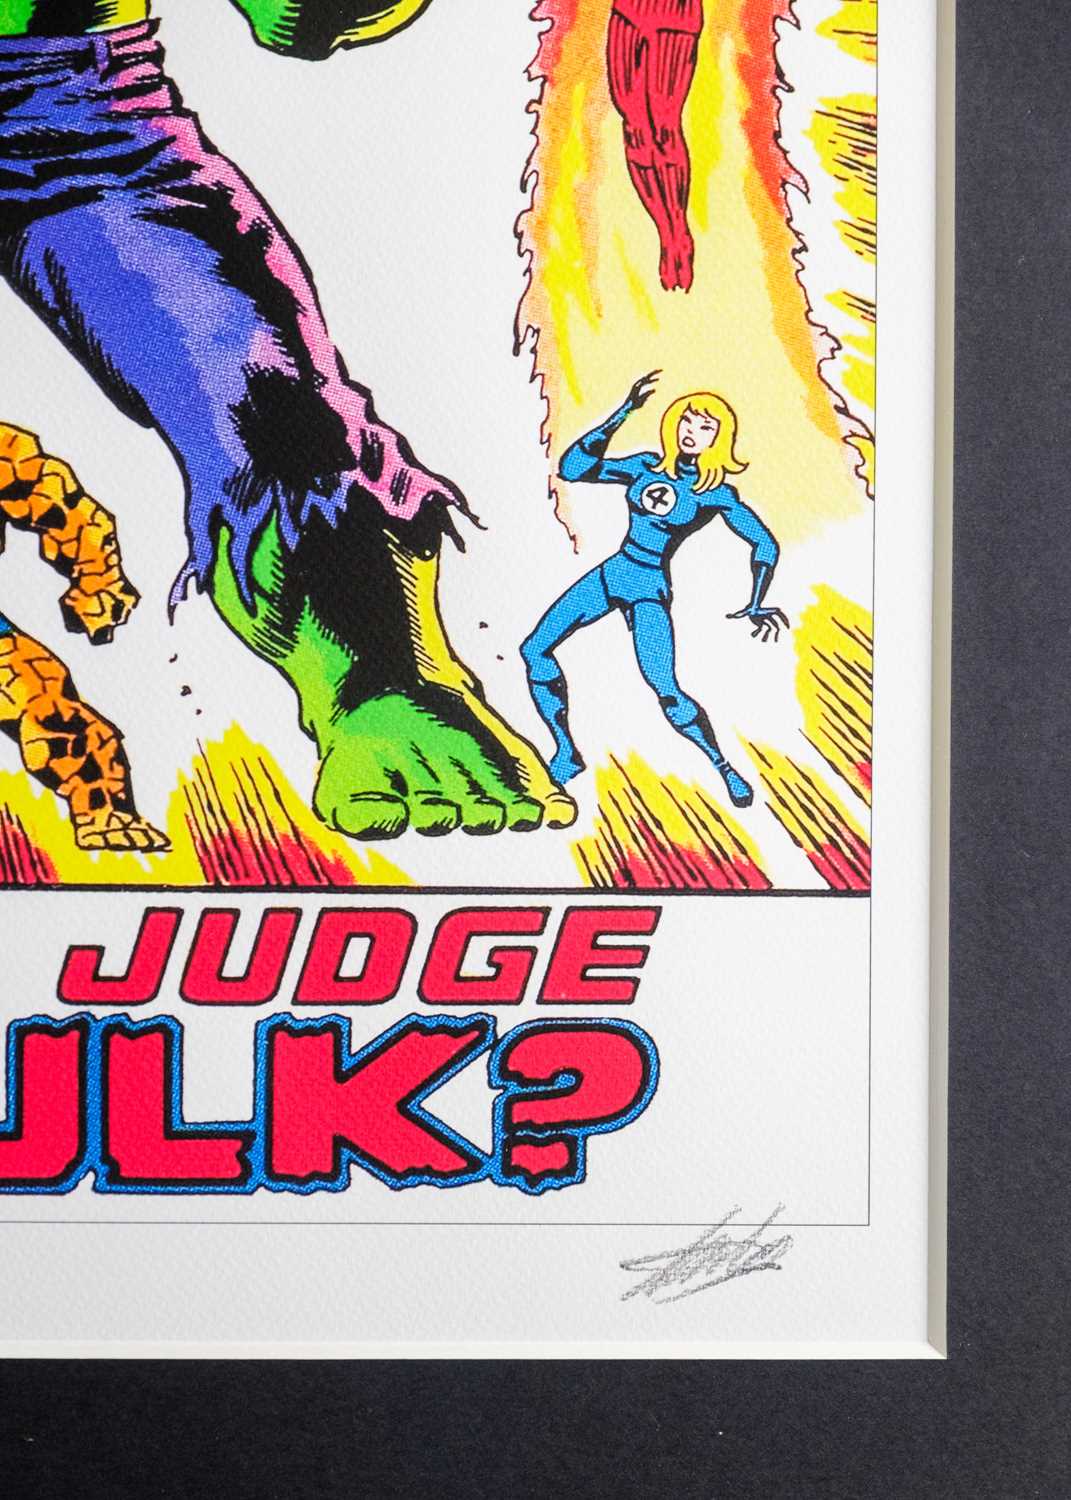 (Signed) Stan LEE (1922-2018) The Incredible Hulk #152 - Who Will Judge The Hulk? (2013) - Image 5 of 5